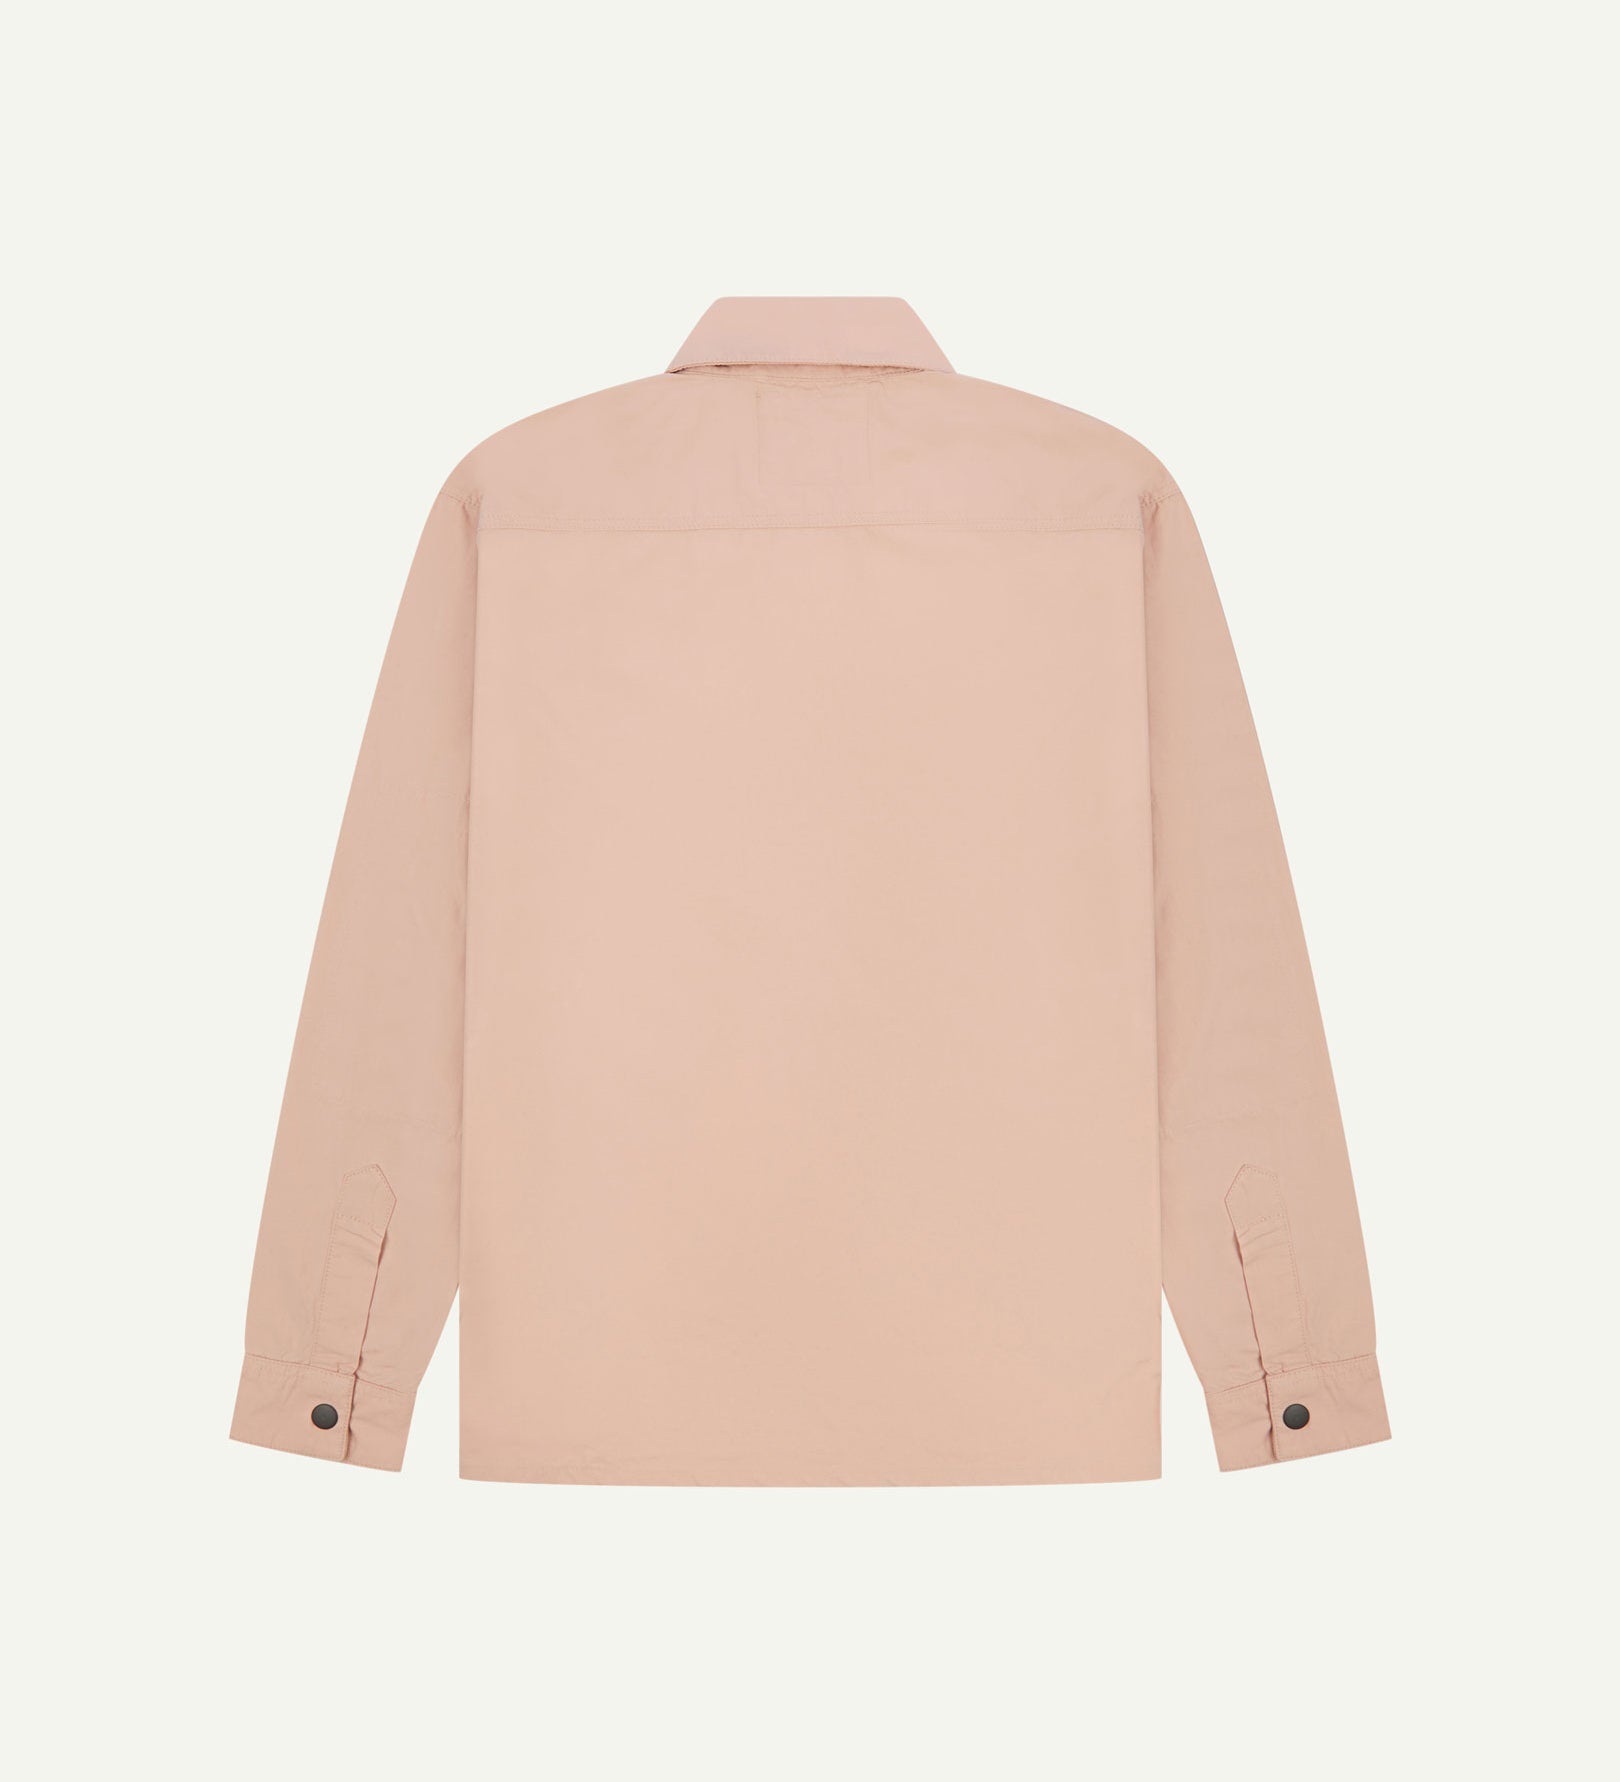 Reverse view of dusty pink, lightweight zip-front jacket showing reinforced elbows, boxy silhouette and 'popper' cuffs.